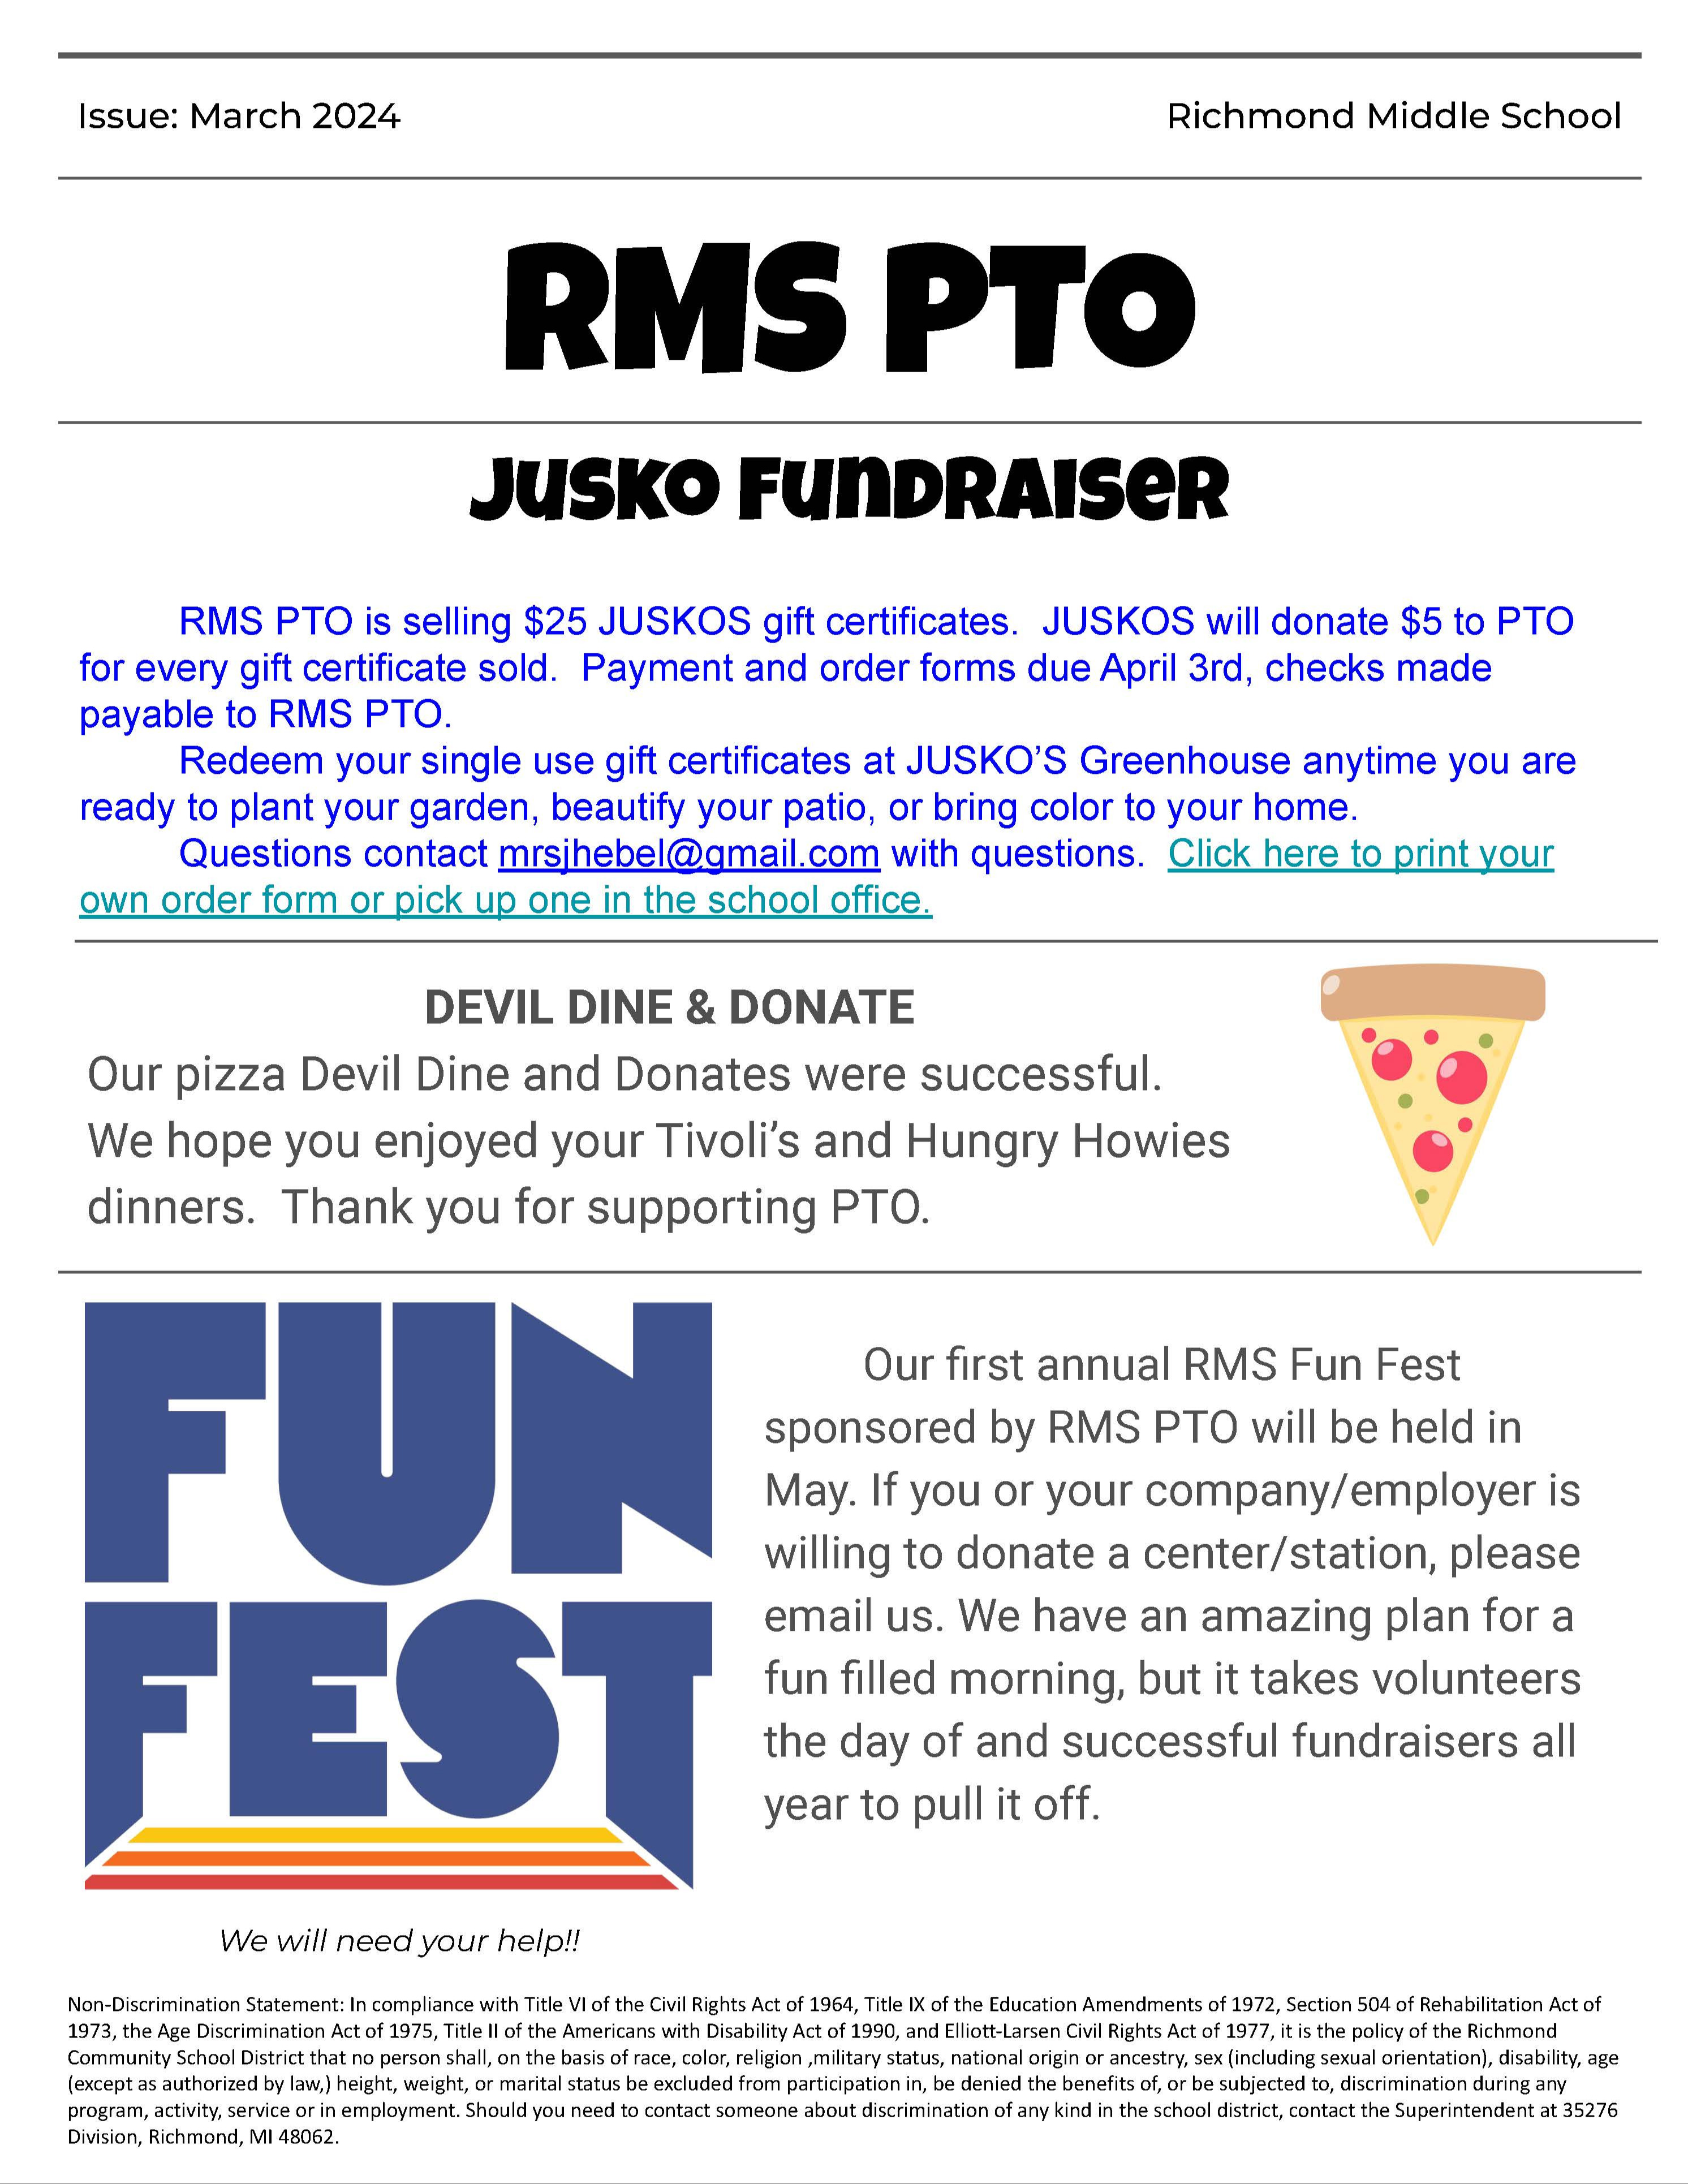 RMS PTO Newsletter Issue March 2024 - Page 2